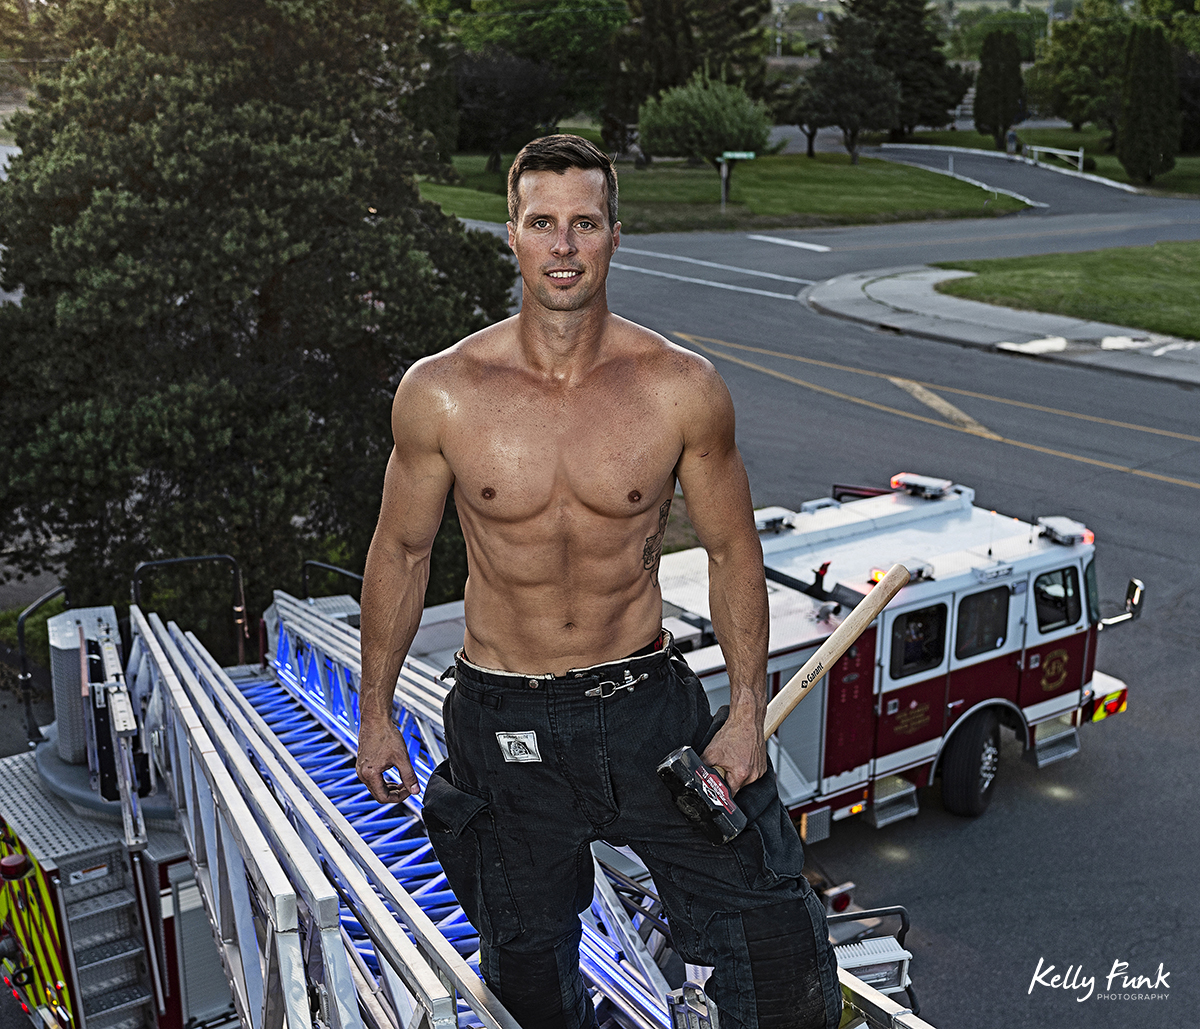 a good looking fire fighter poses for a commercial portrait during shooting for the 2019 Kamloops fire fighters calendar, Thompson Okanagan region, British Columbia, Canada